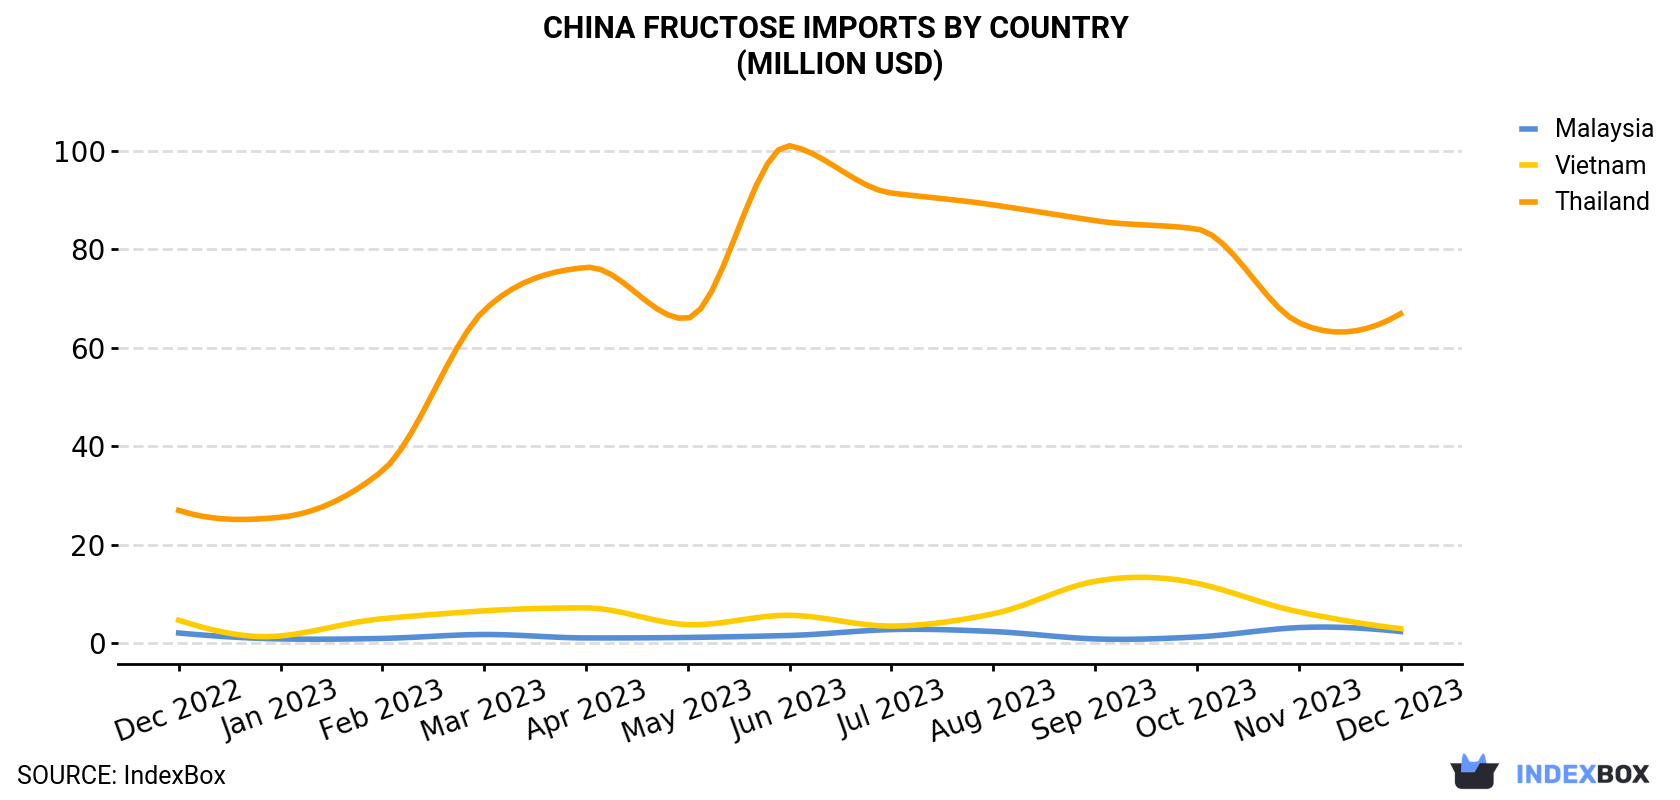 China Fructose Imports By Country (Million USD)